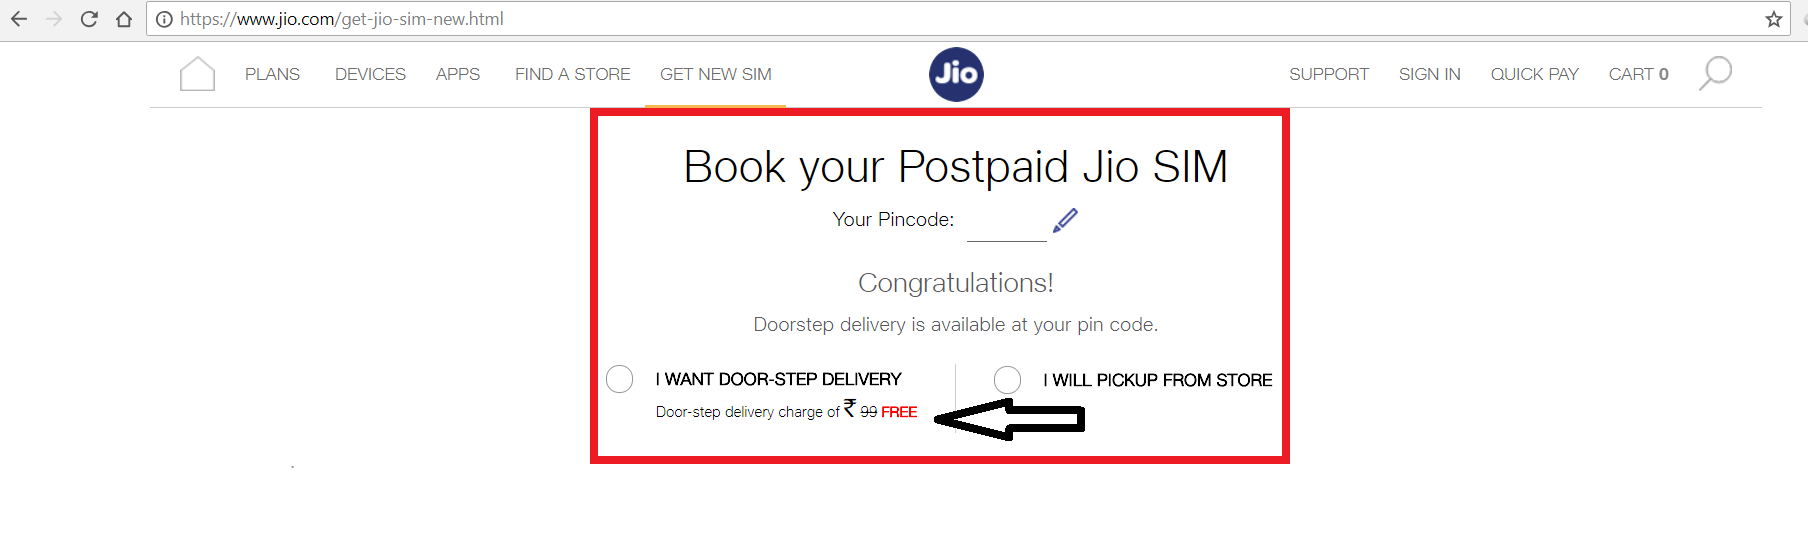 Jio Postpaid Home Delivery